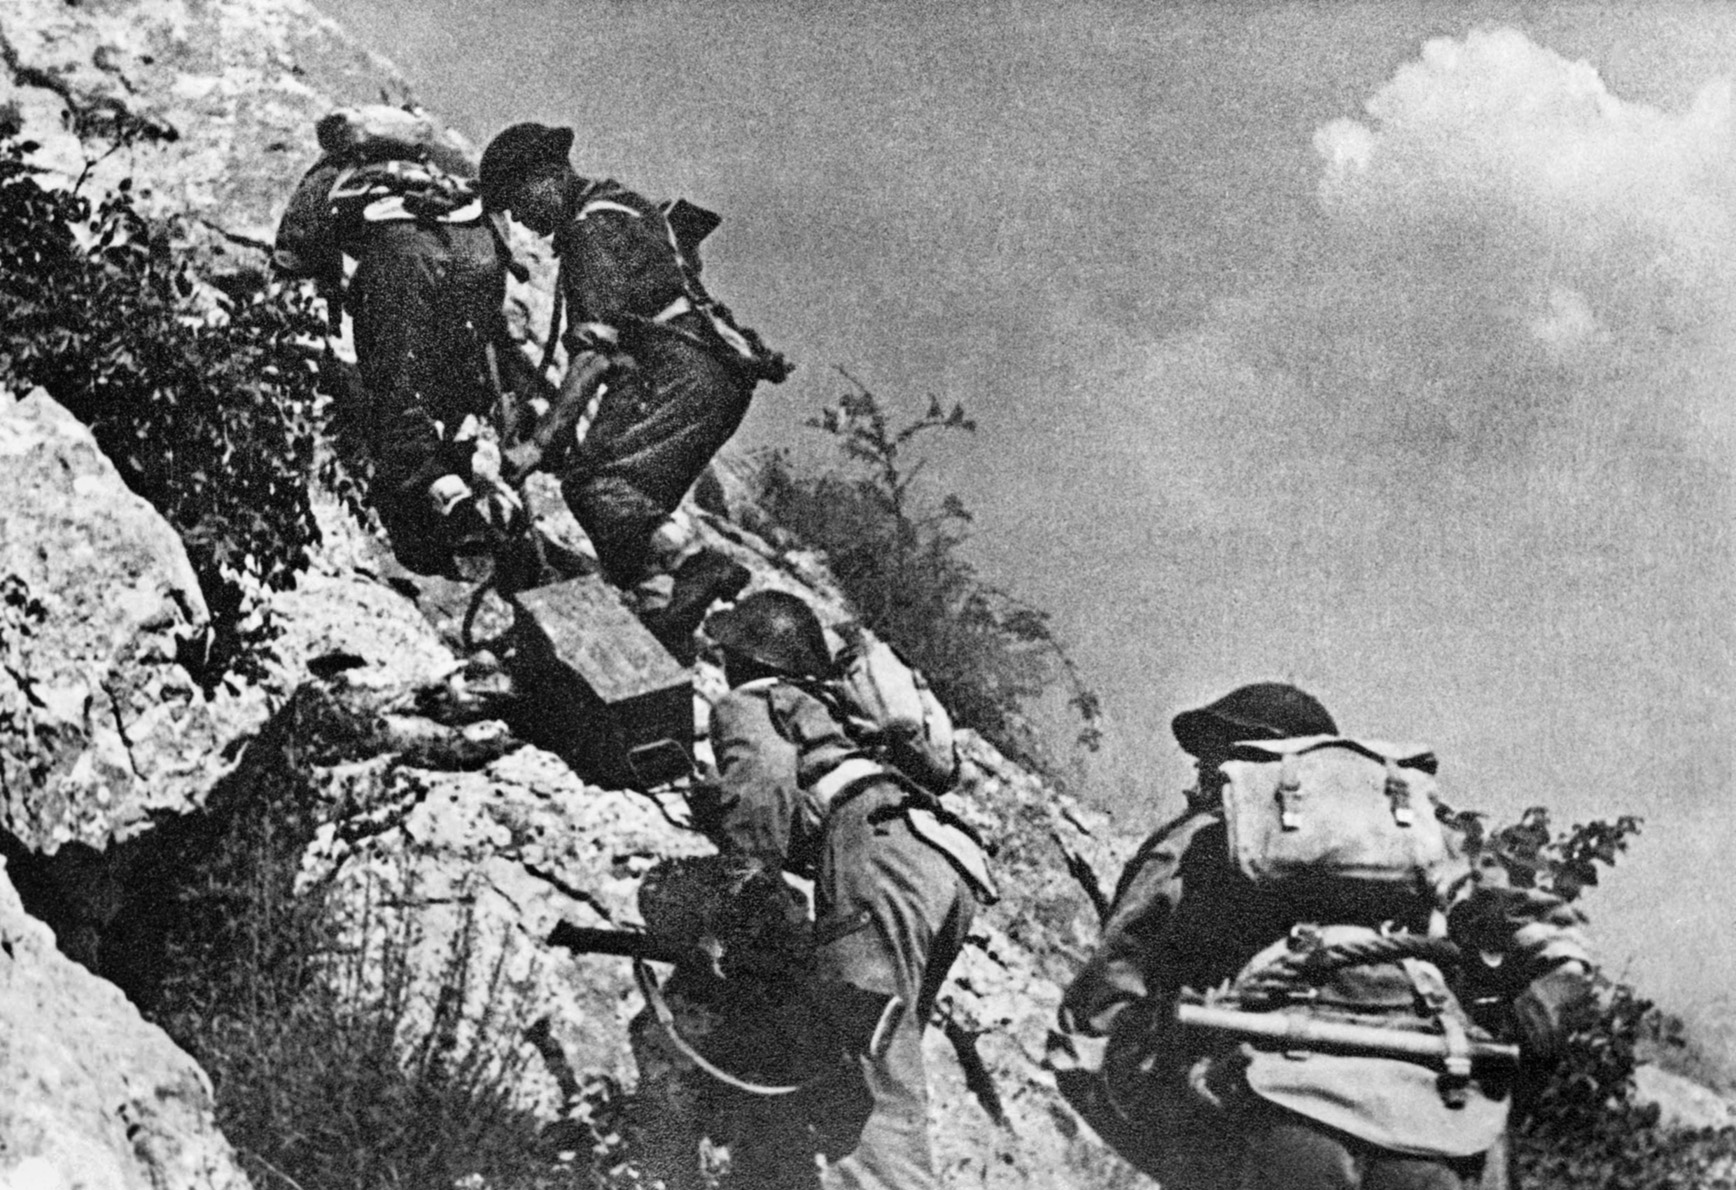 Soldiers of the Polish 2nd Corps participate in the final assault on Monte Cassino on May 18, 1943.